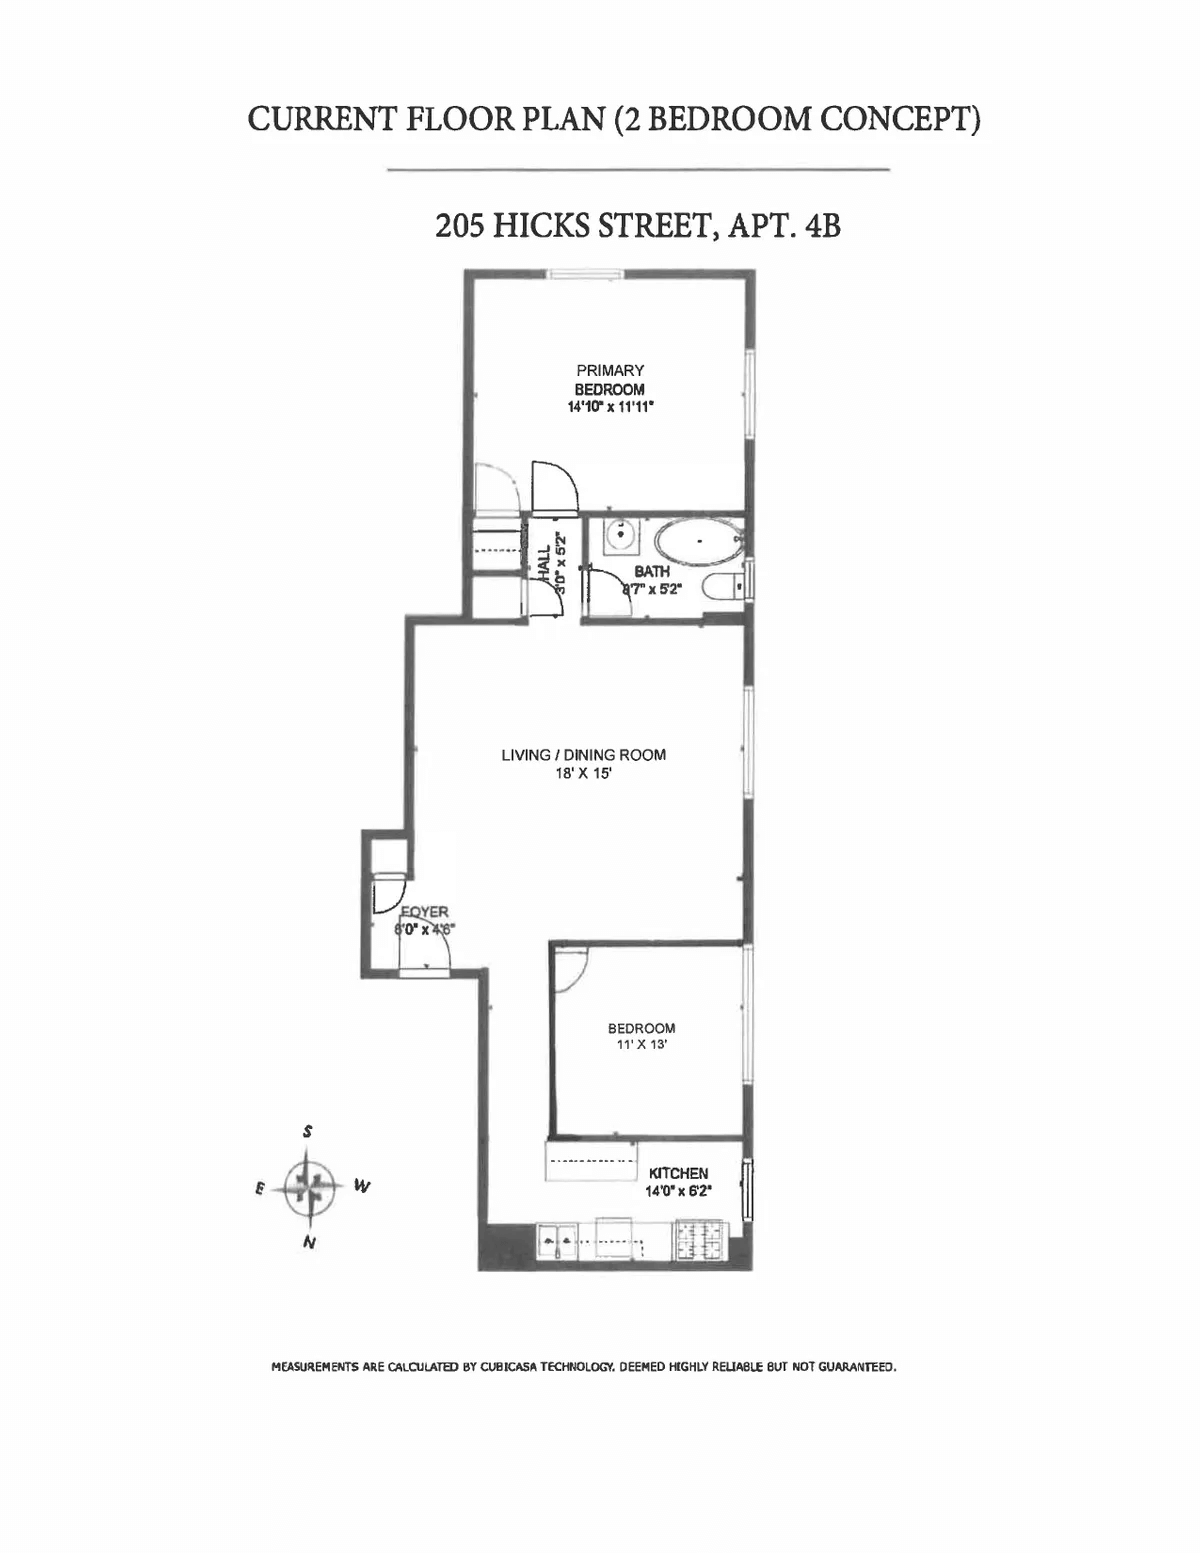 alternative floorplan with second bedroom carved out of dining room